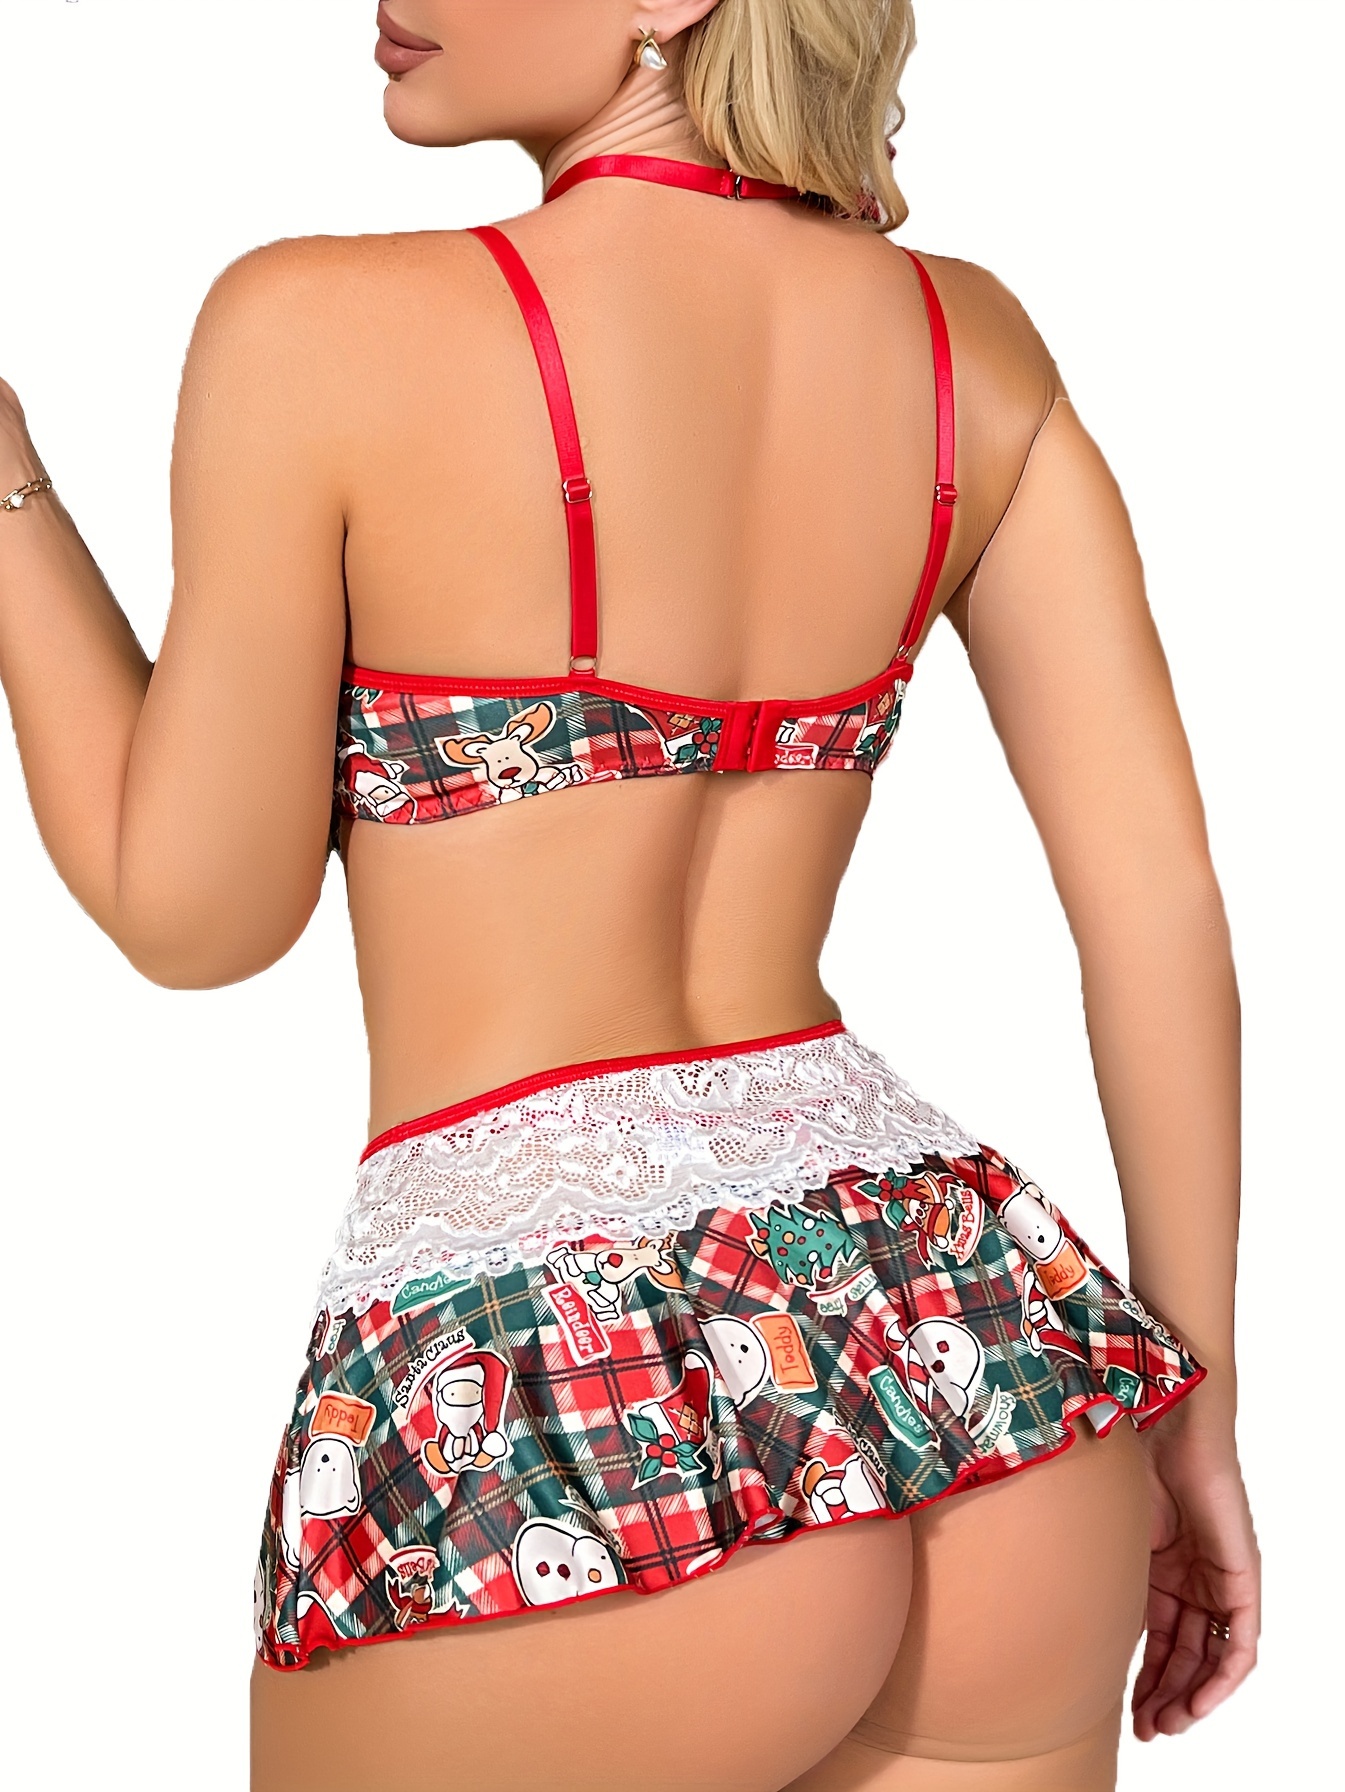 Womens Lace Sexy Plaid Bra Set Christmas Red Check Lingerie